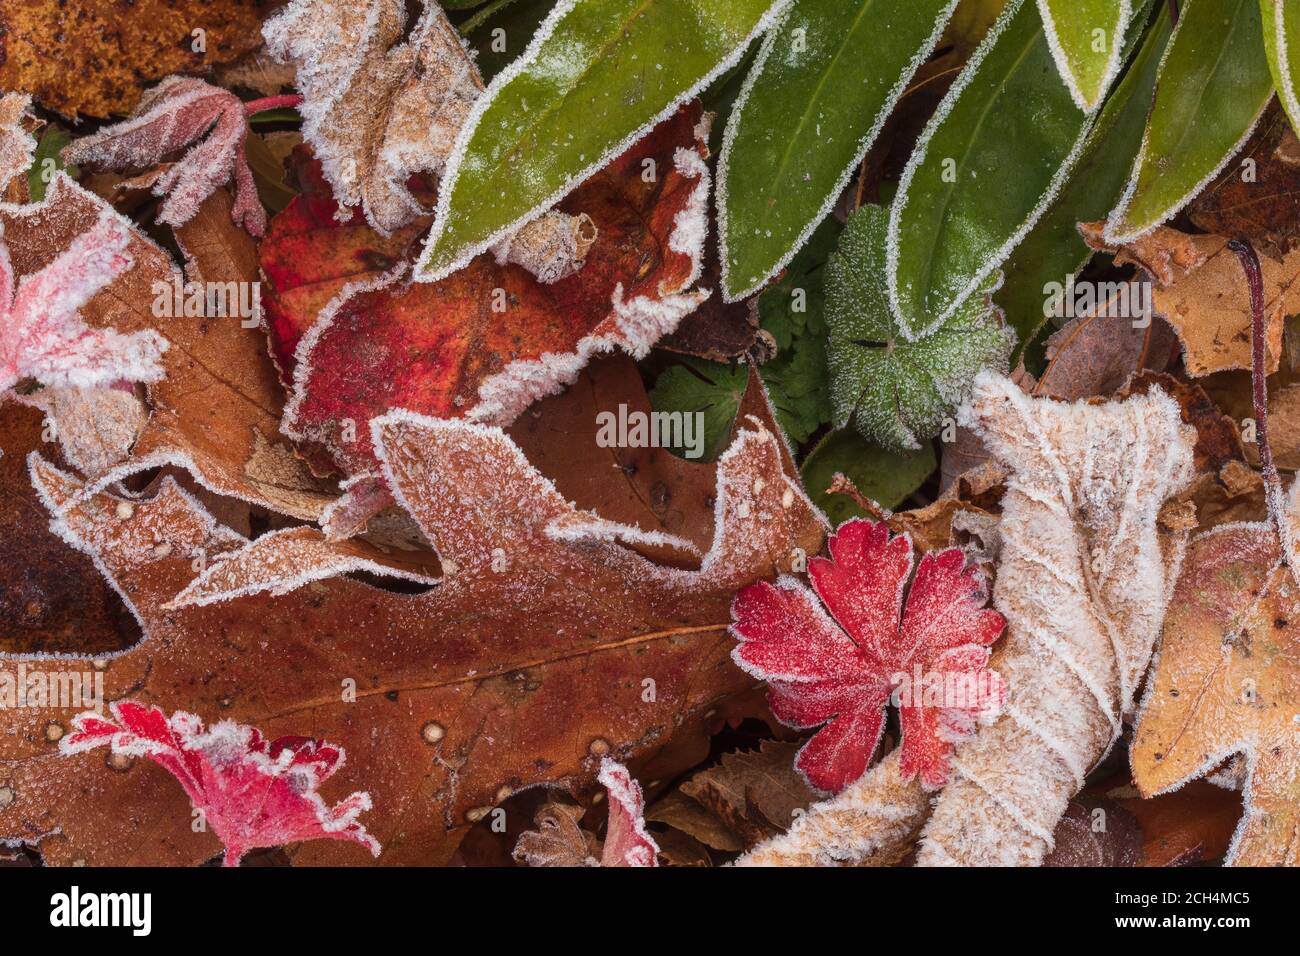 Image of frosted leaves near Halifax, Nova Scotia, Canada. Stock Photo